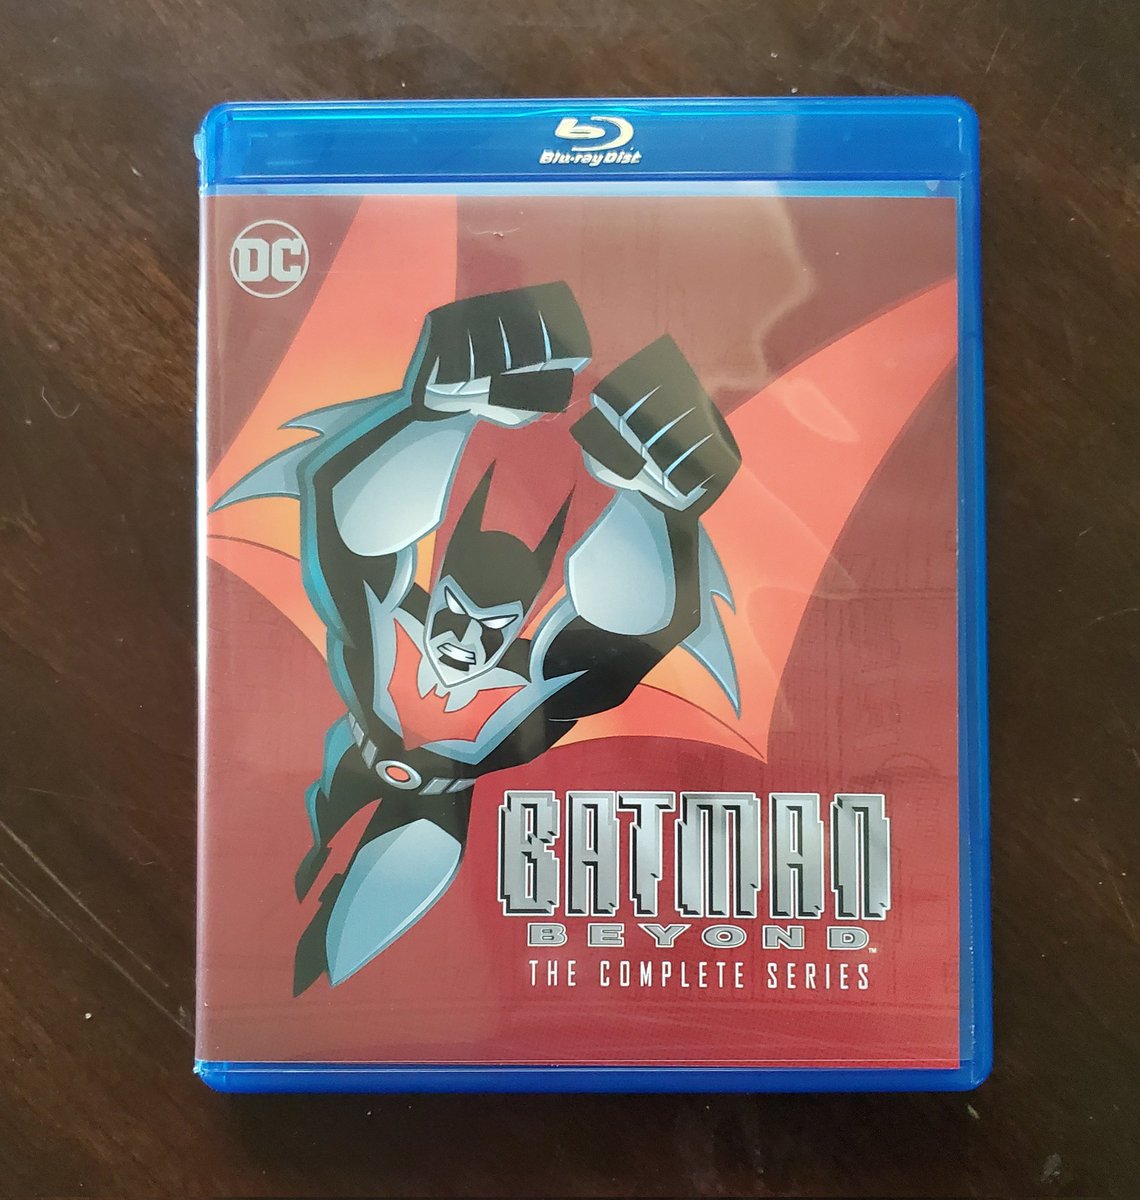 A new Batman for a new Era Batman beyond the complete series and Return of the joker blu Ray set #DCcomics #Batman #batmanbeyond #Returnofthejoker